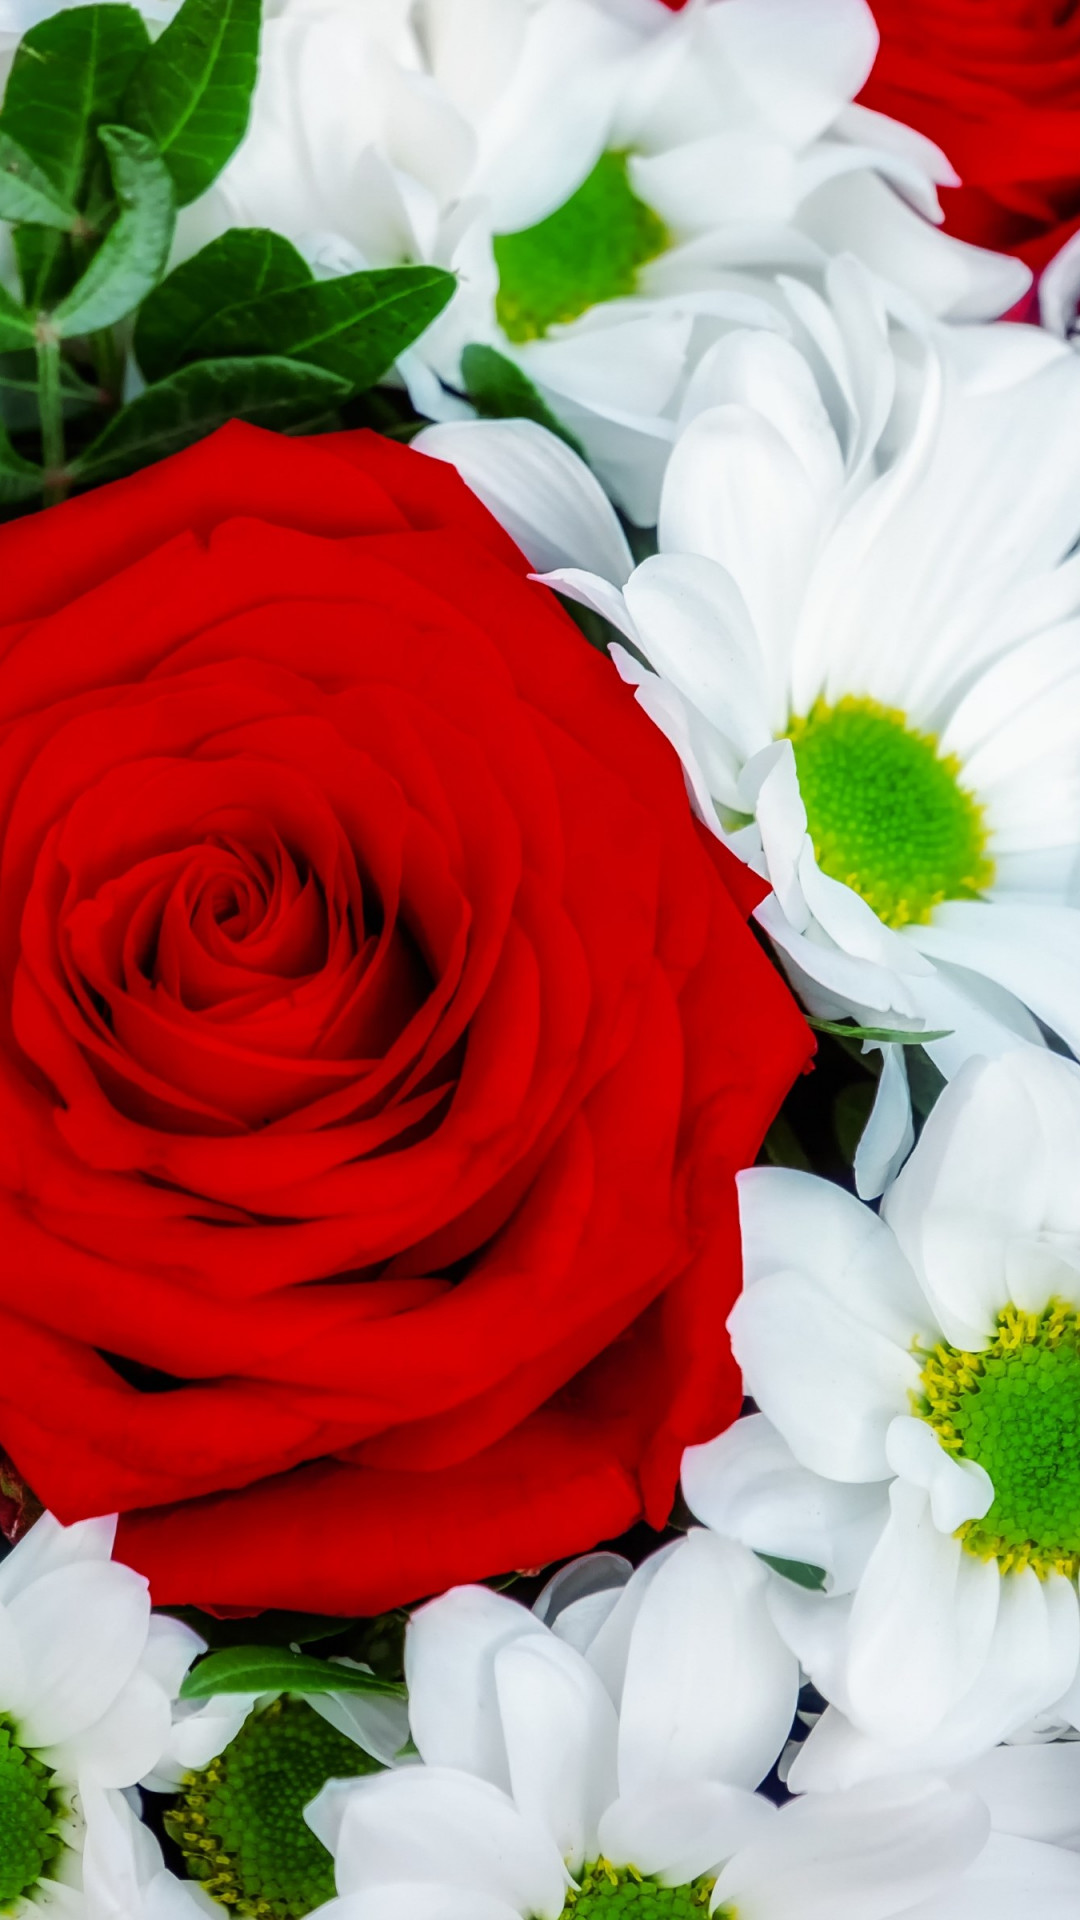 Roses and daisies bouquet wallpaper 1080x1920